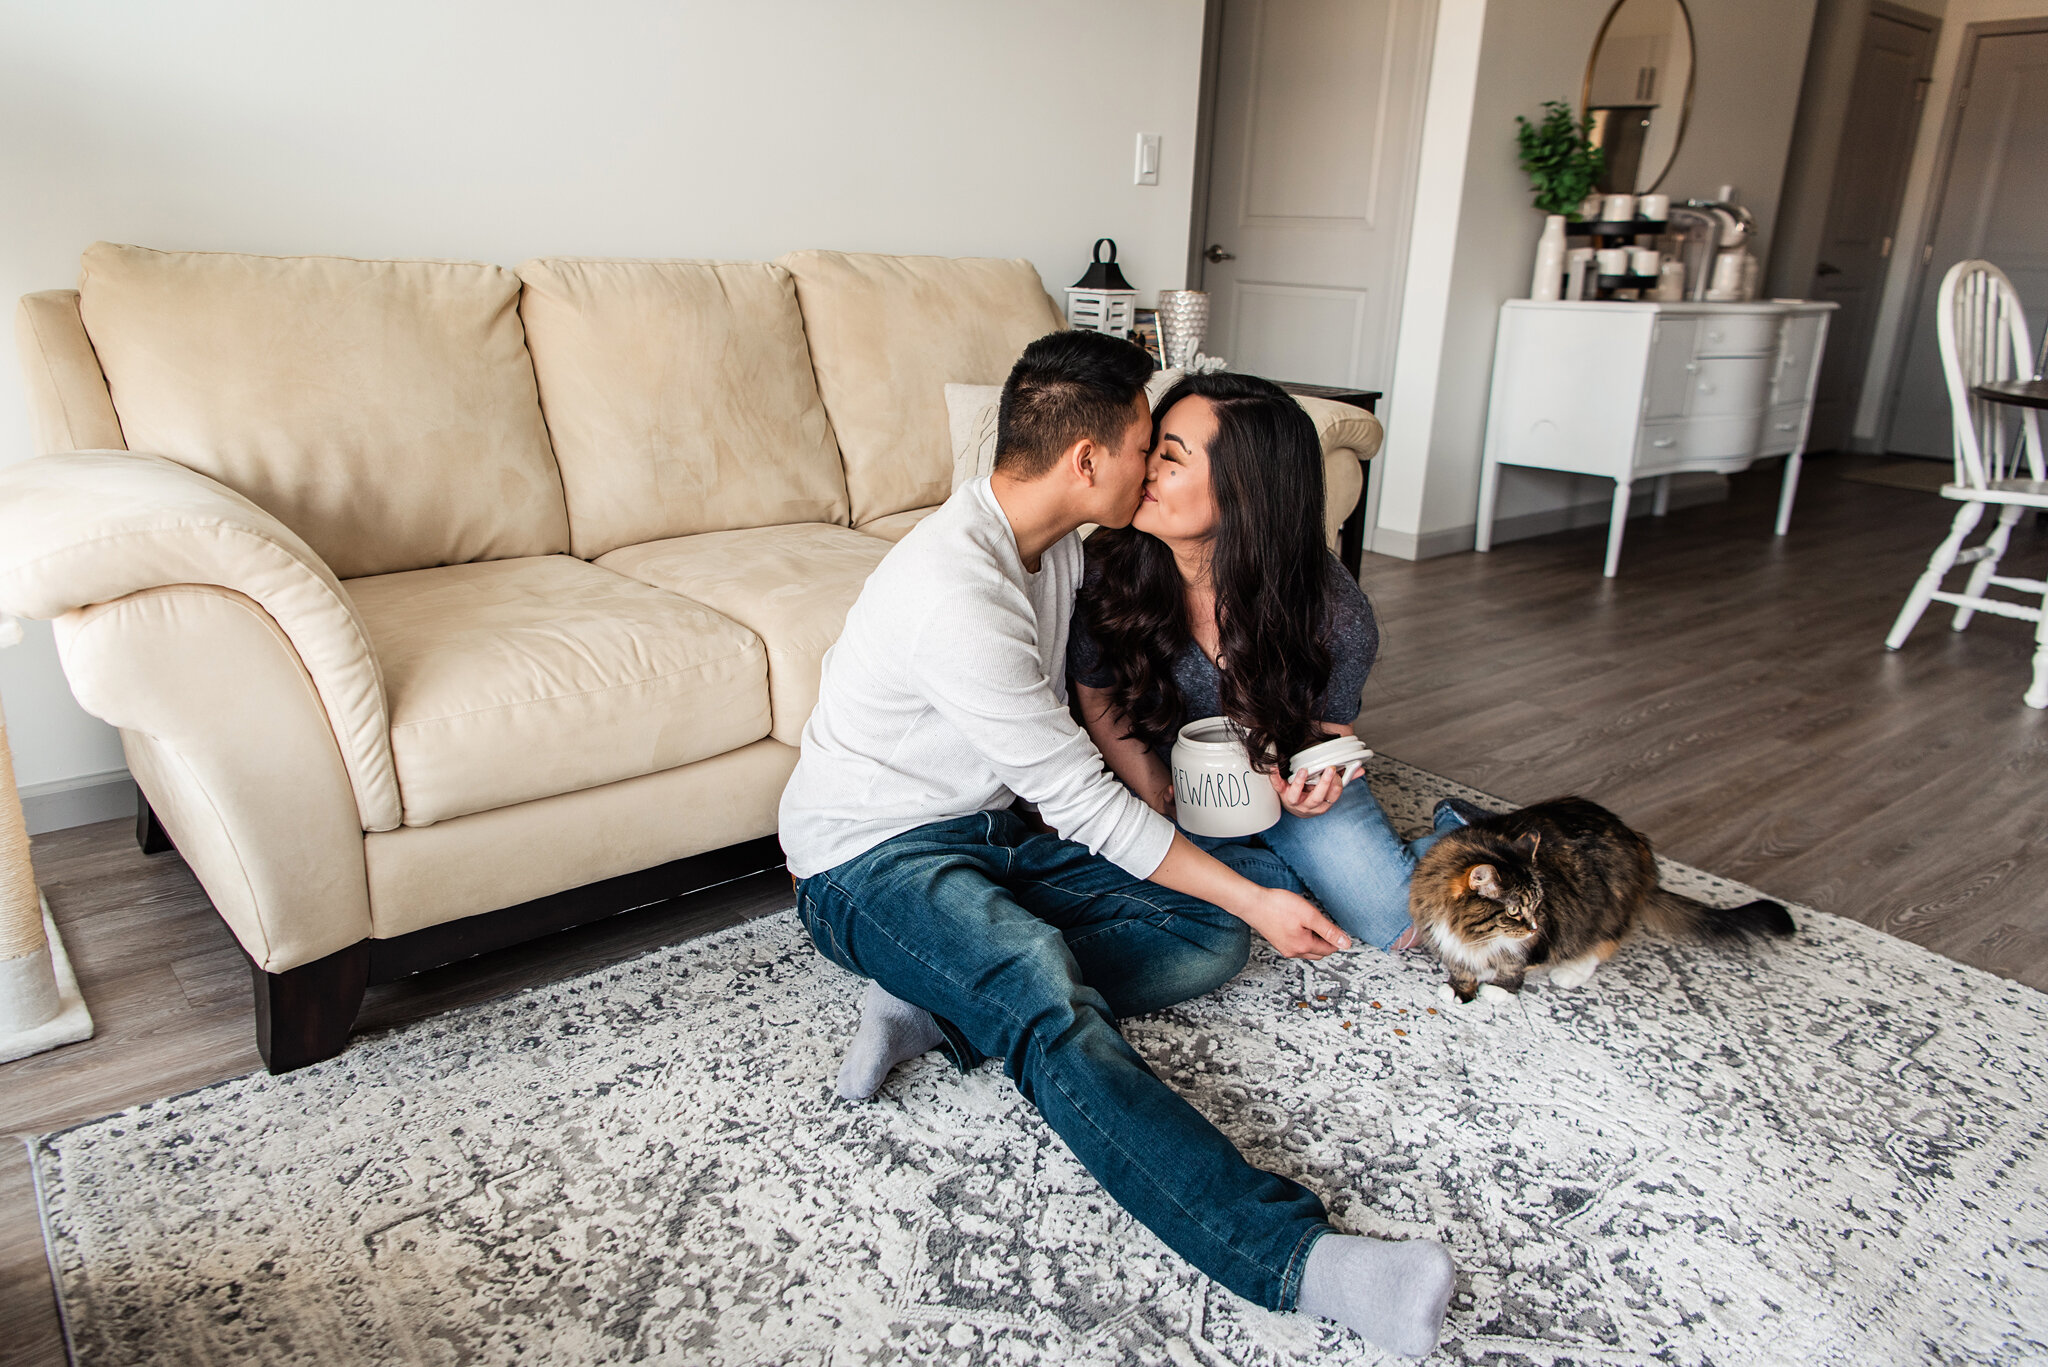 In_Home_Rochester_Couples_Session_JILL_STUDIO_Rochester_NY_Photographer_4092.jpg